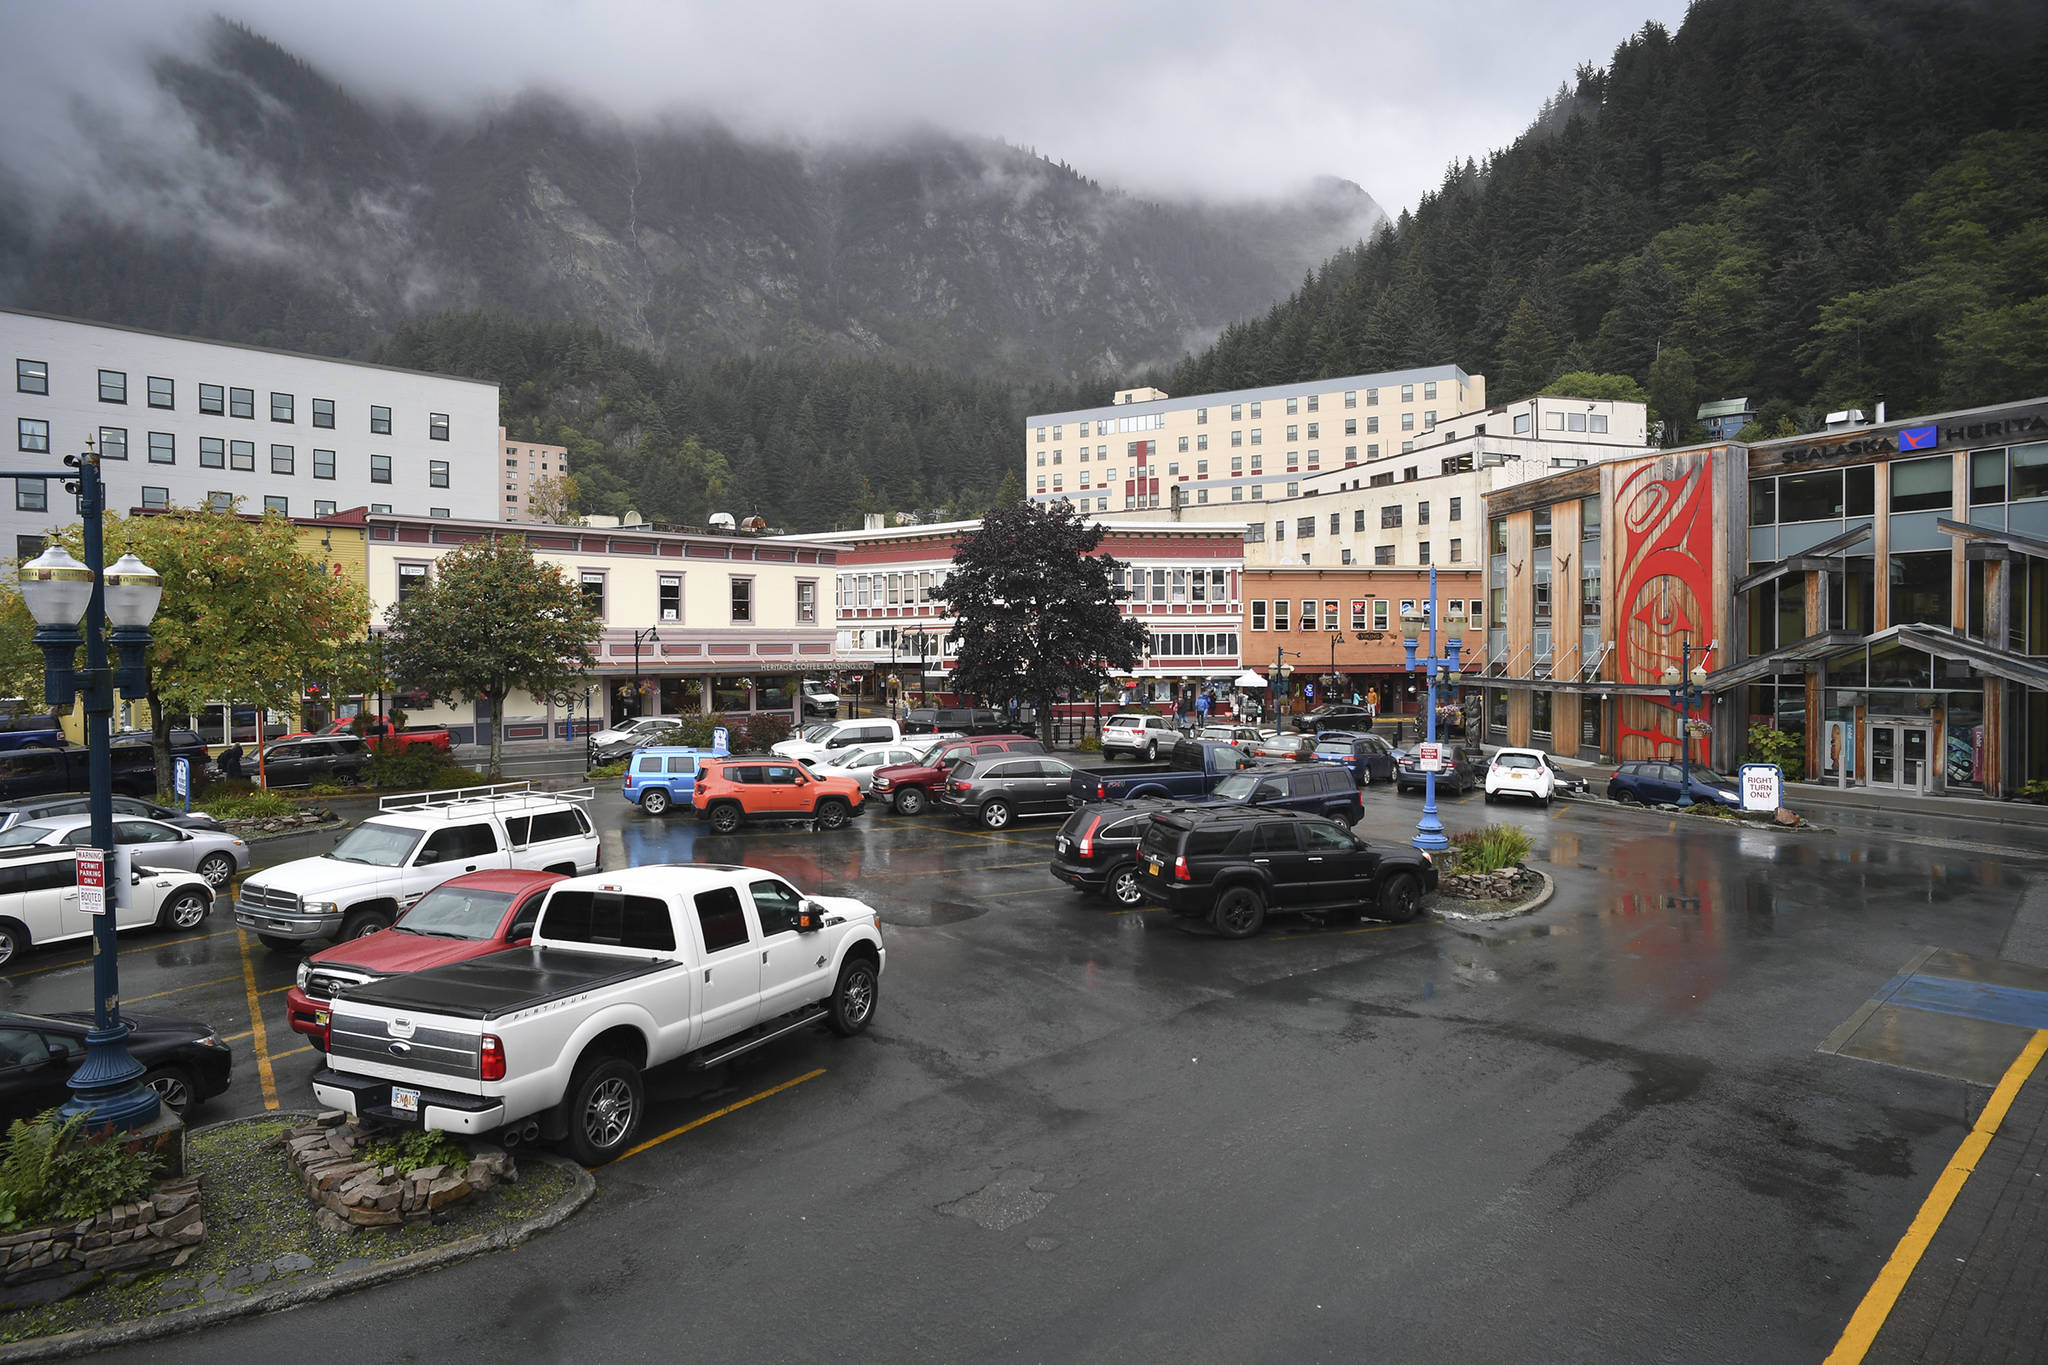 Sealaska Heritage Institute announced Wednesday, Sept. 18, 2019, it is raising money to build a Sealaska Heritage Arts Campus in the current location of the Sealaska Corp. parking lot. (Michael Penn | Juneau Empire)